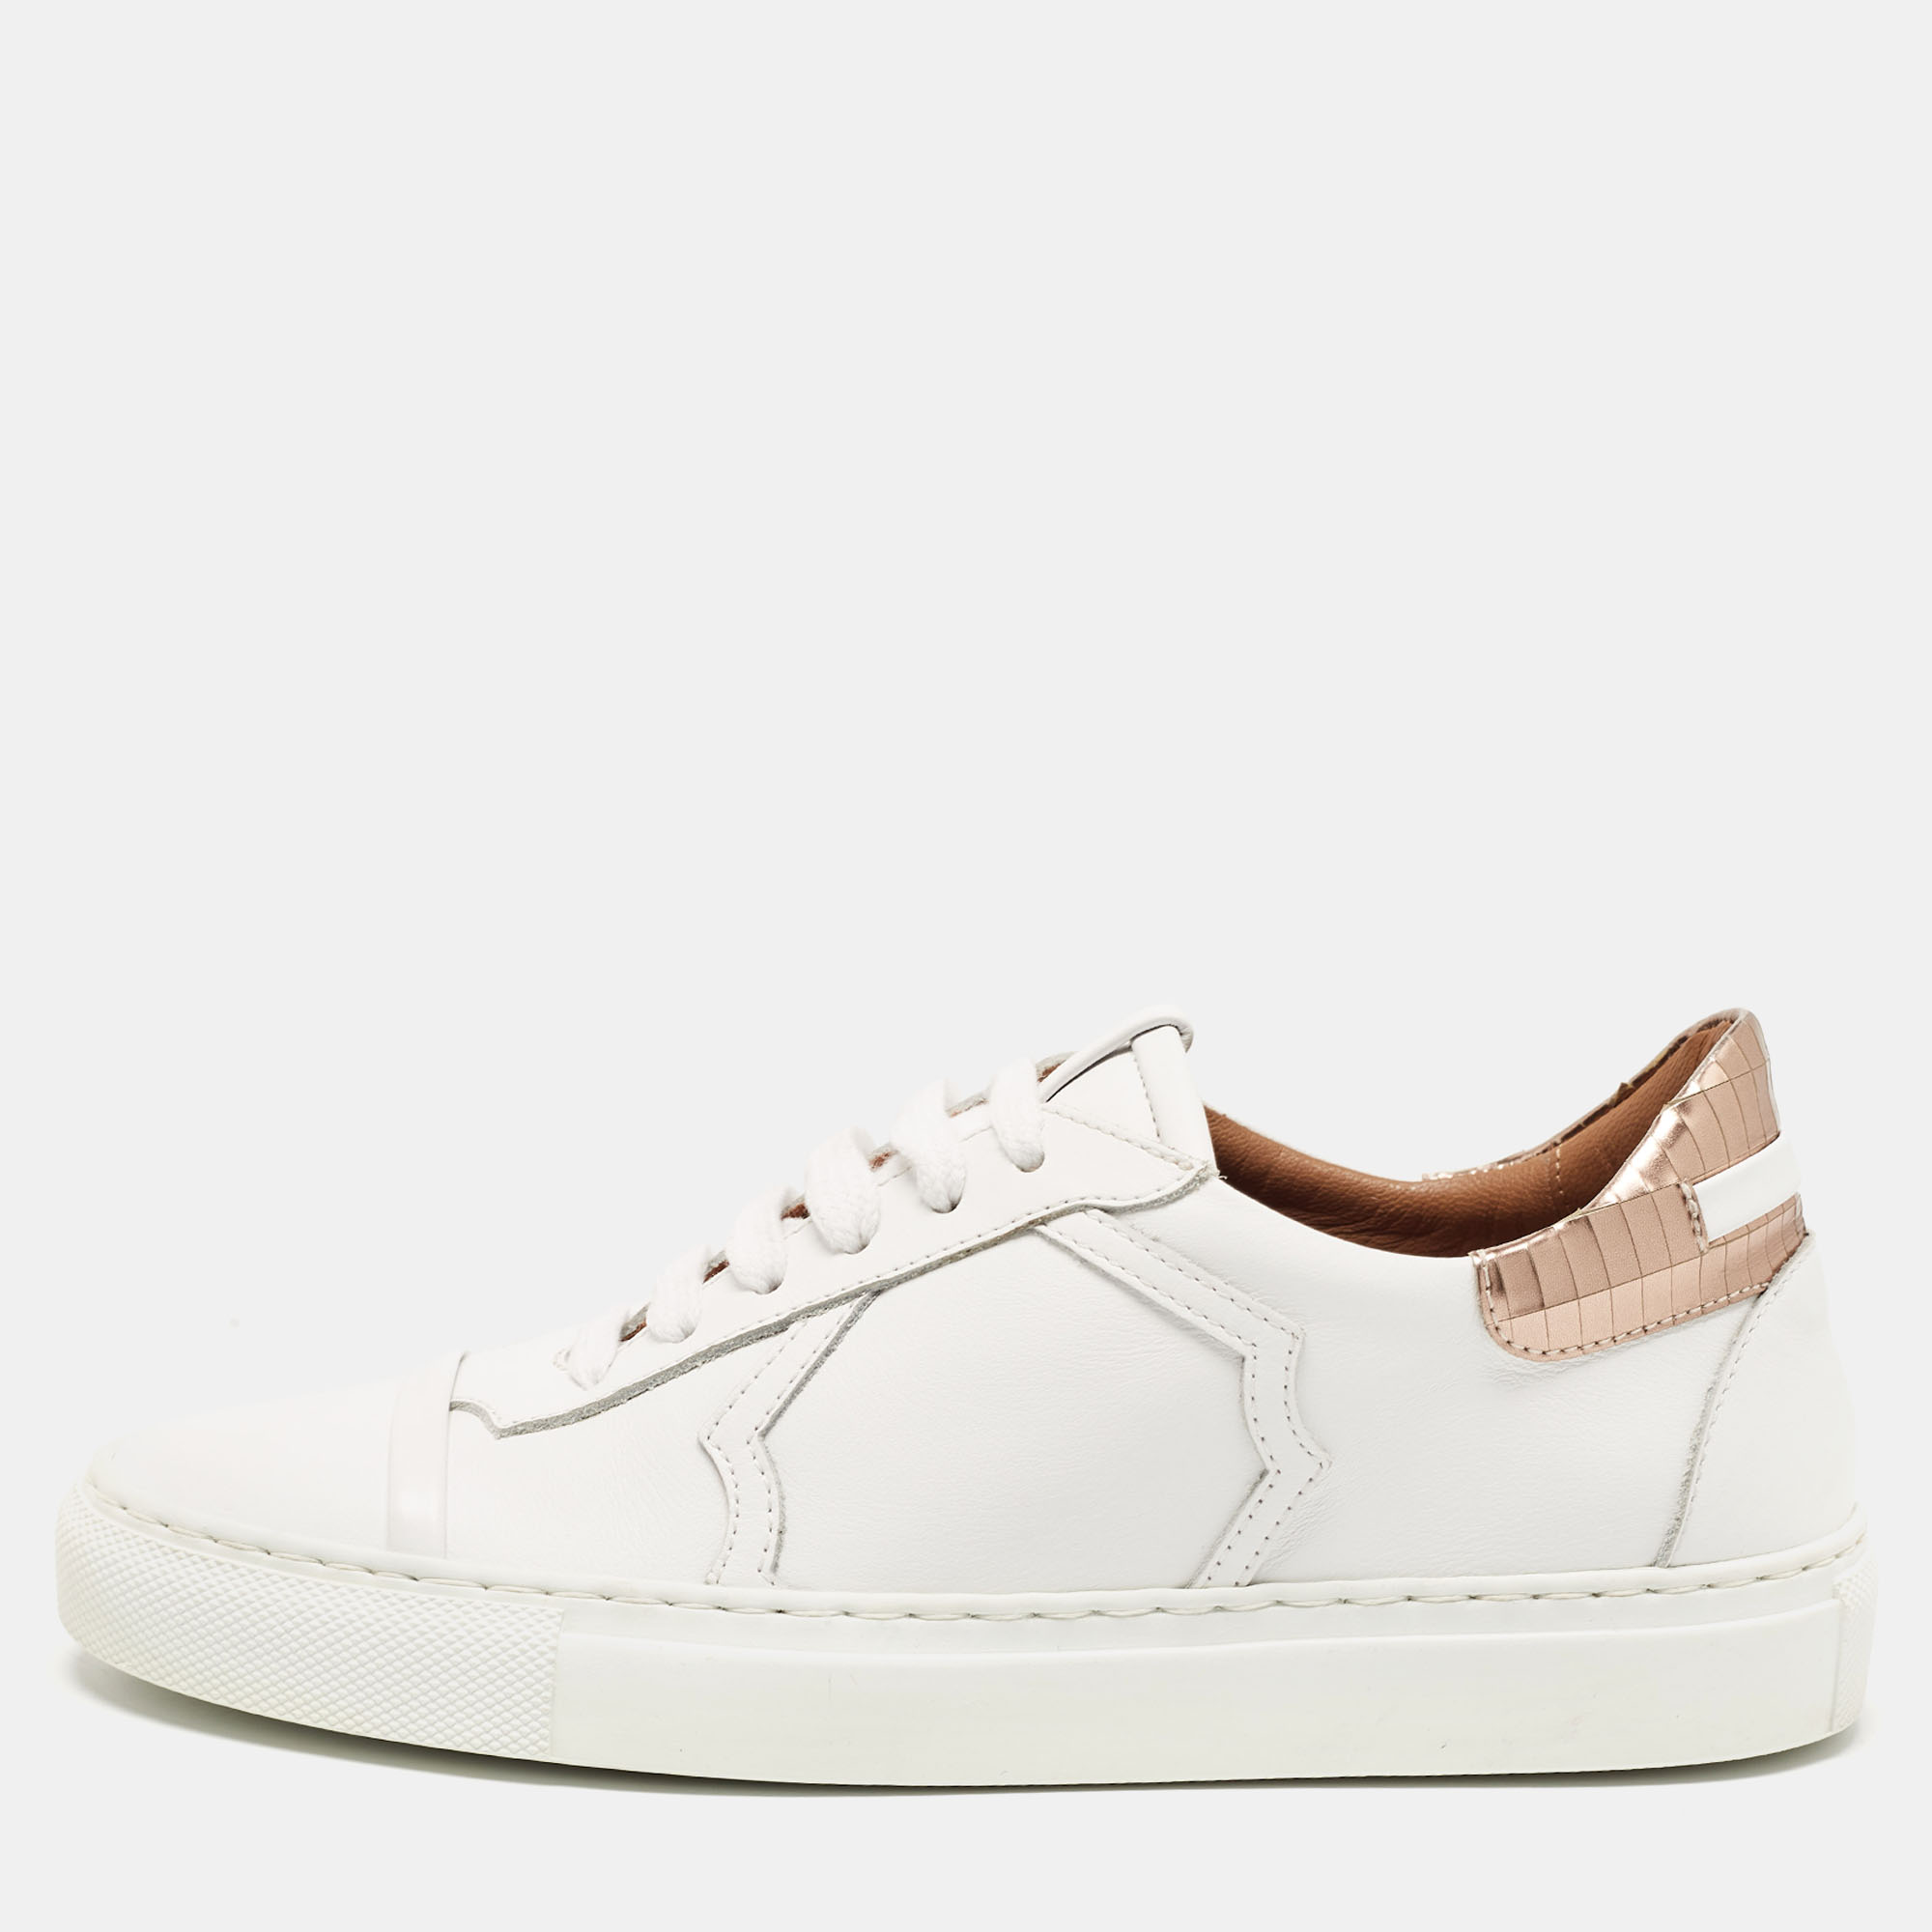 Malone souliers white/rose gold leather musa sneakers size 36